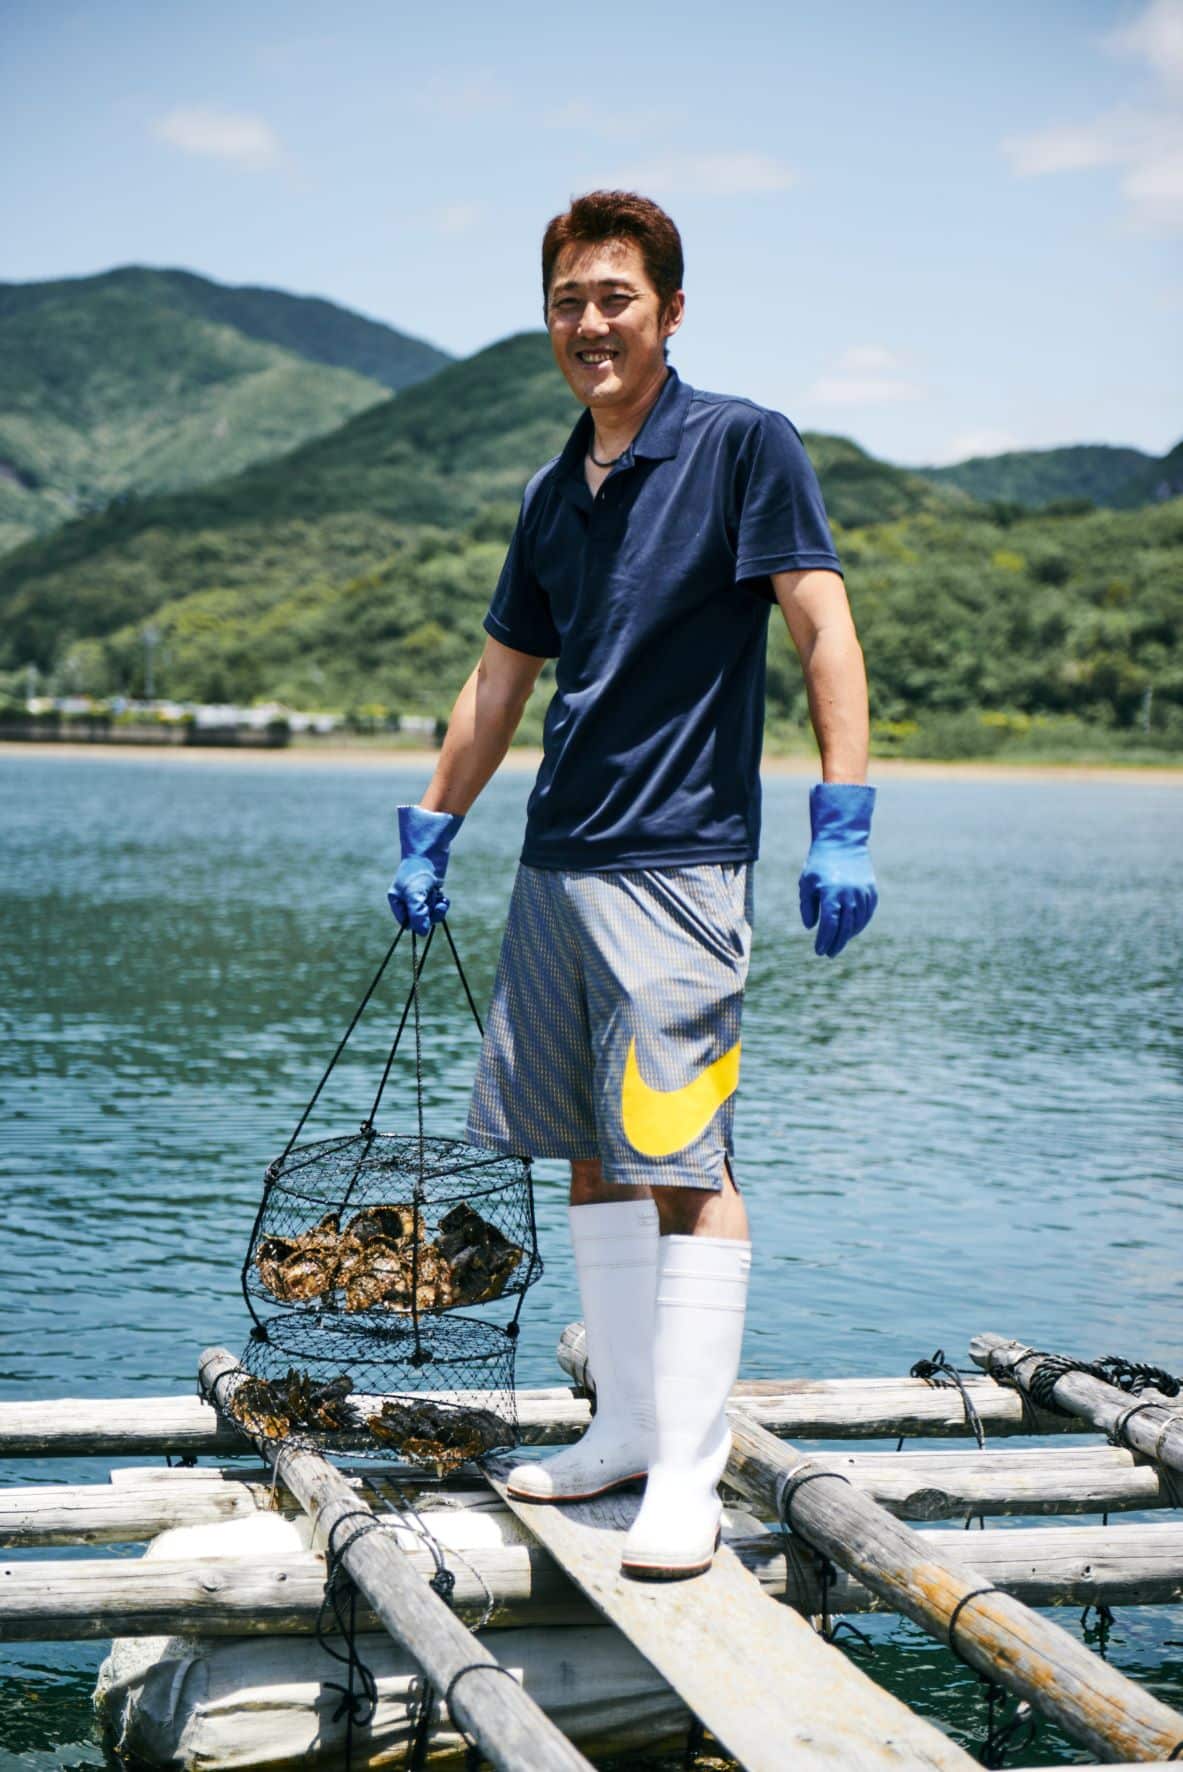 Pearl Farming Process it not easy task - Mr Takatsugu Nishiura (49 years old), a local pearl farmer. “It’s been over 30 years since I followed in my father’s footsteps right after graduating from high school,” says Takatsugu.